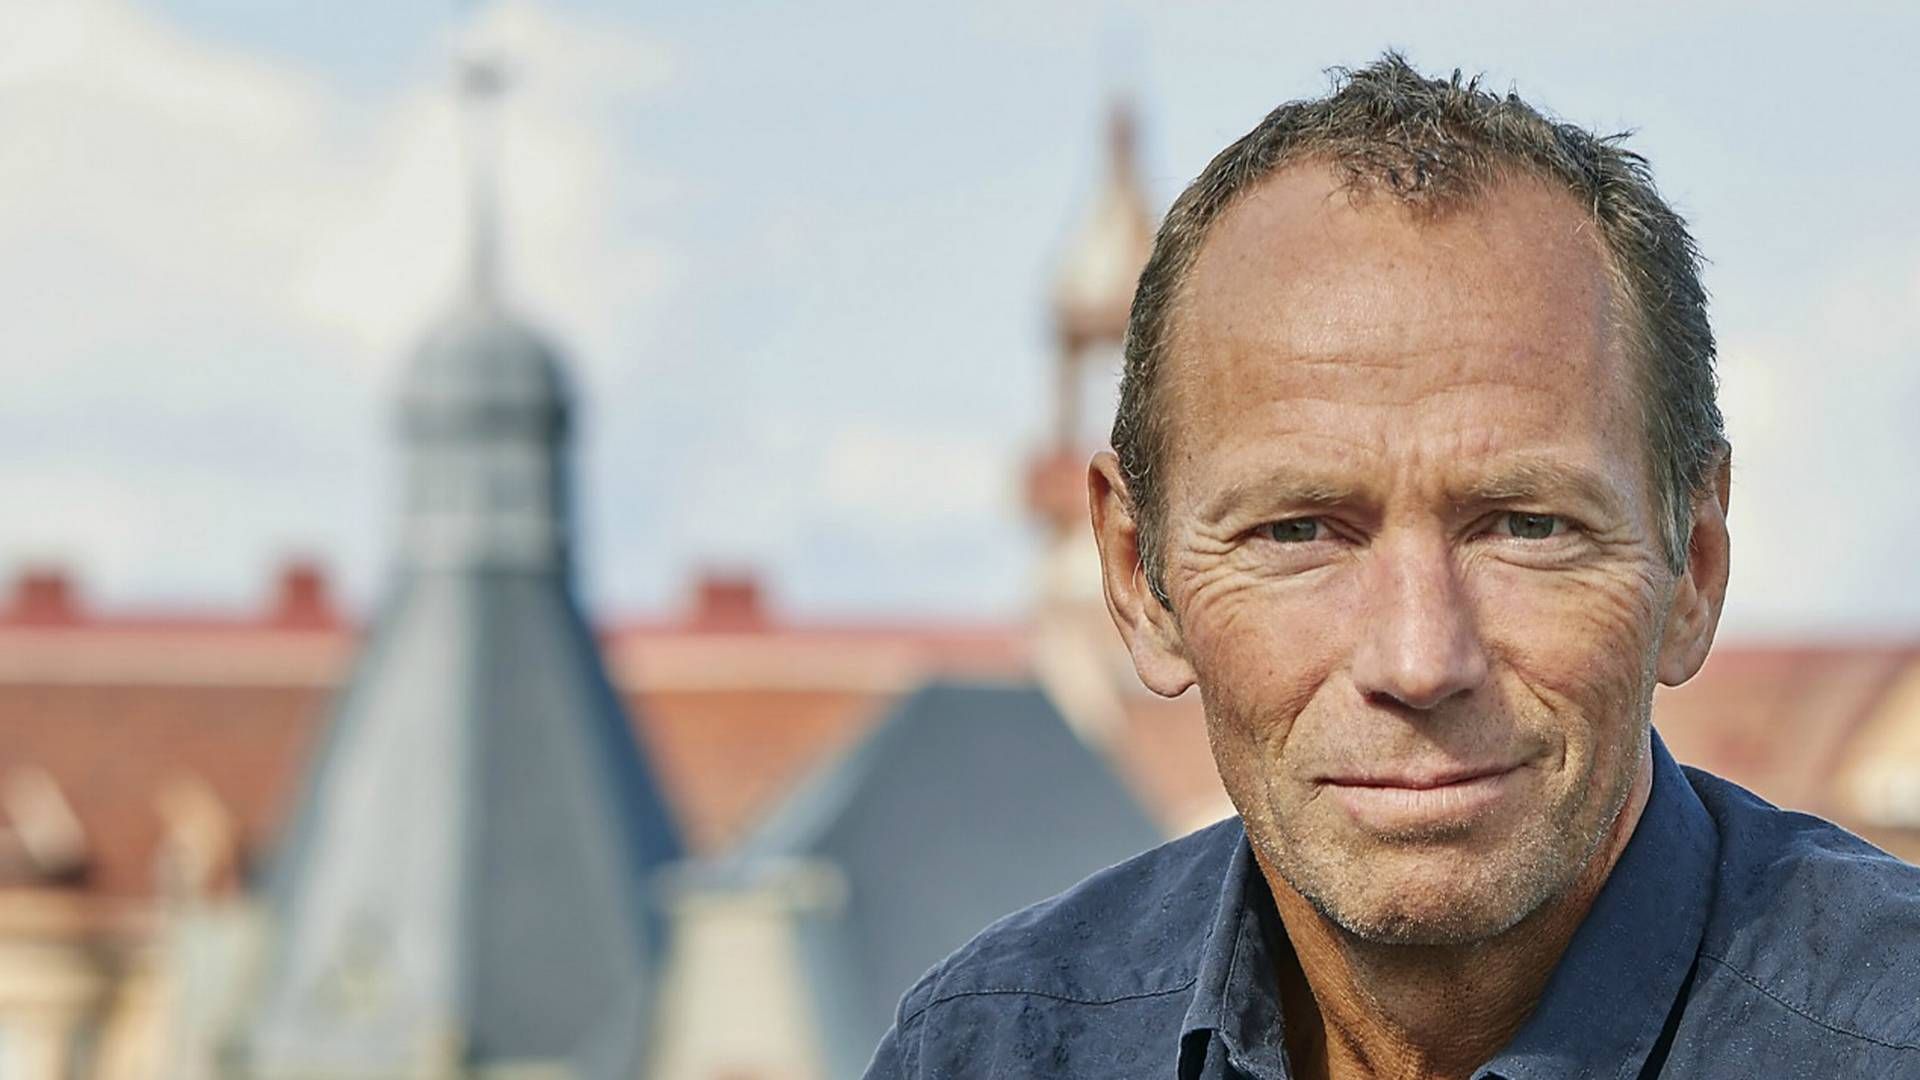 Ivar Tollefsen, The billionaire founder of Heimstaden Bostad AB to look at selling part of his stake in the company. | Photo: Pr/heimstaden